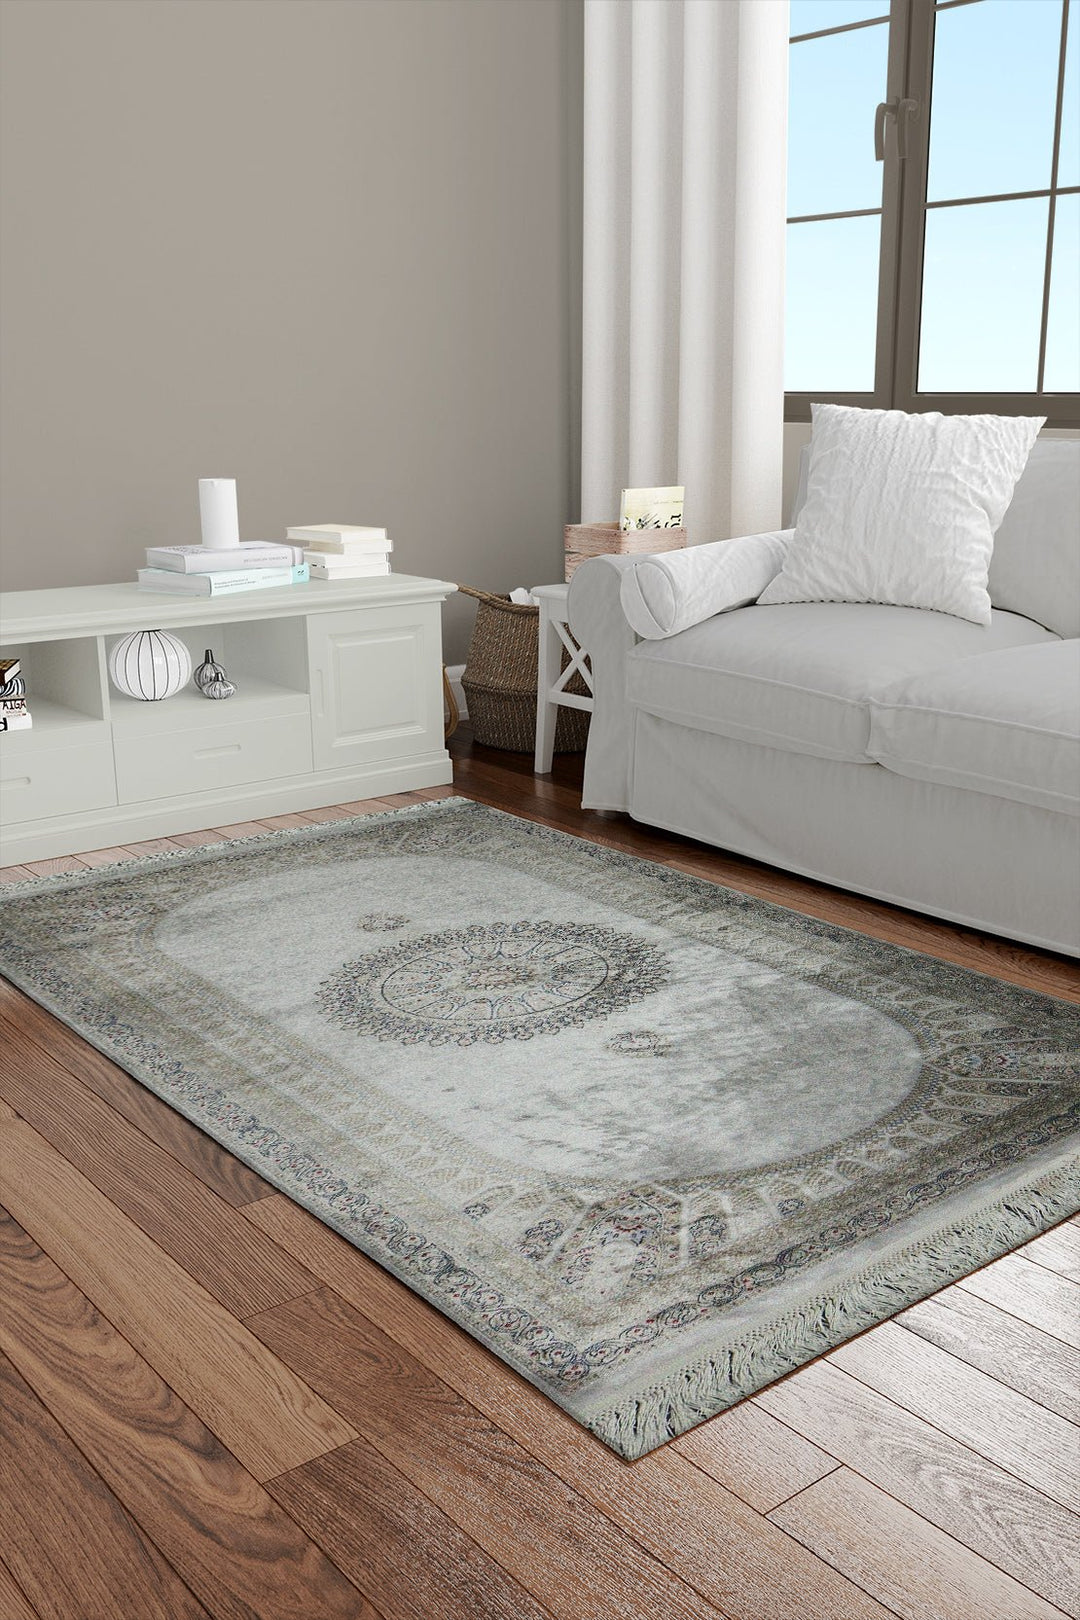 Turkish Premium Ottoman Rug - Gray - 2.6 x 4.9 FT - Resilient Construction for Long-Lasting Use - V Surfaces